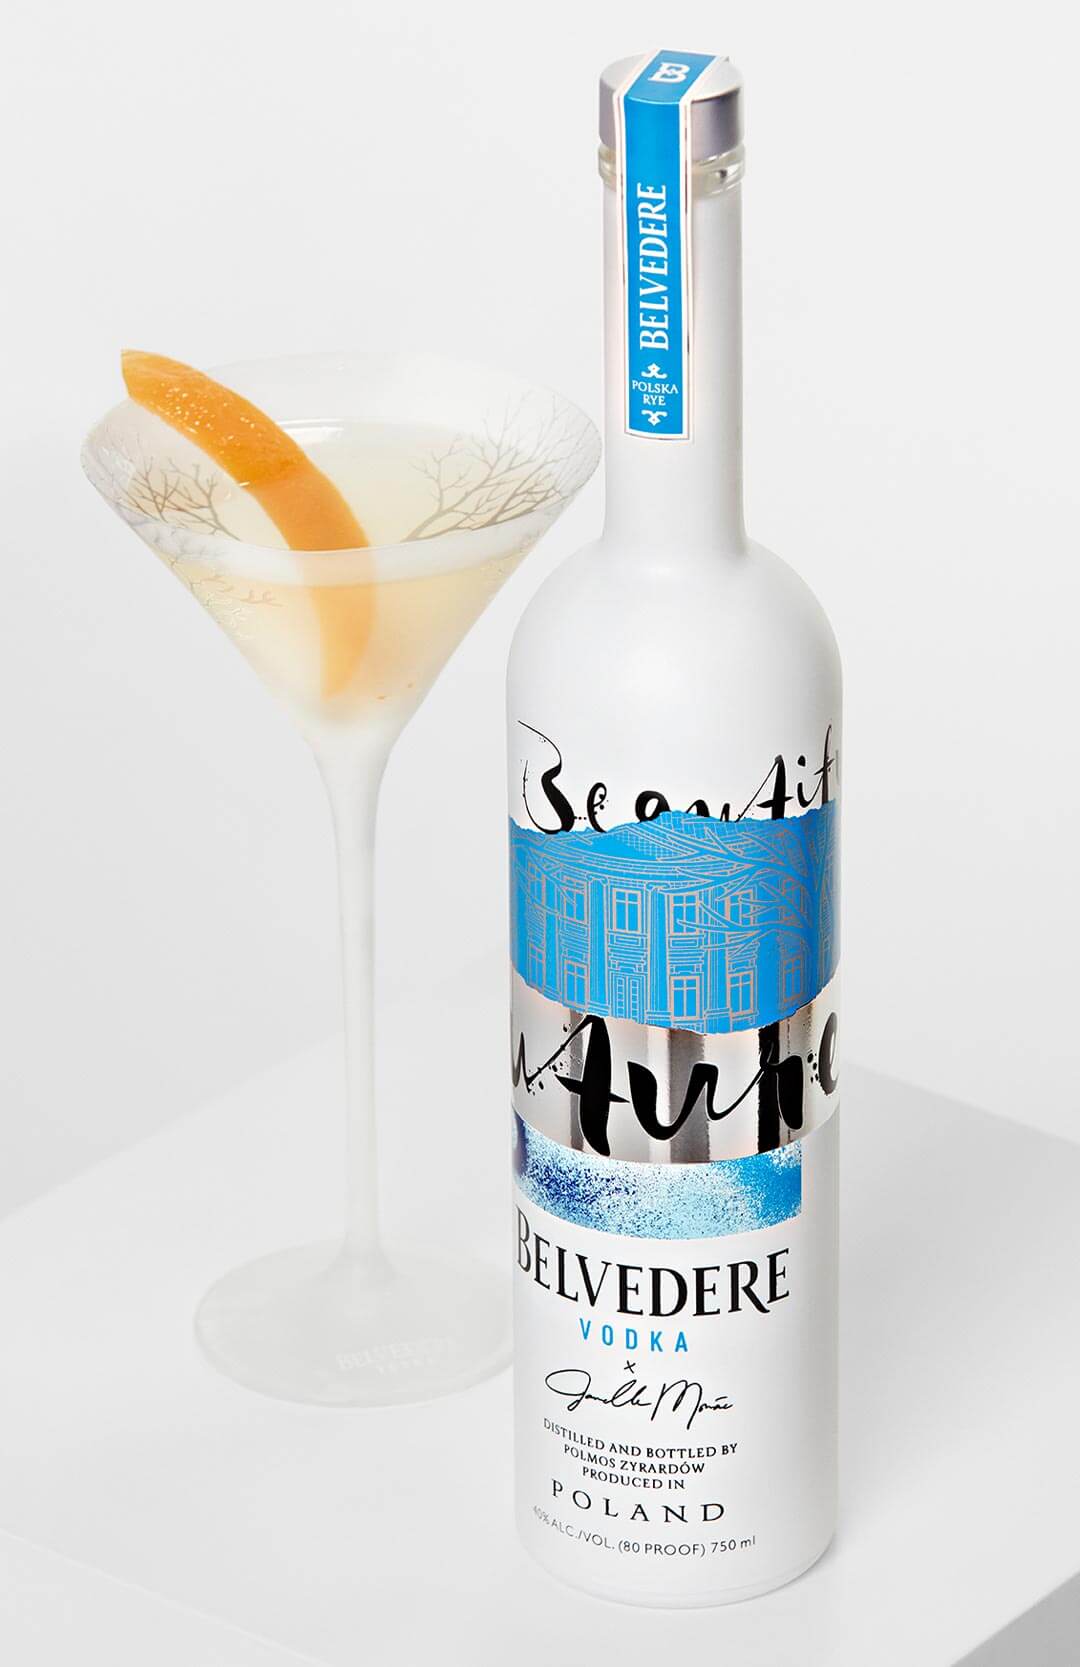 Belvedere “A Beautiful Future” Bottle and martini with garnish